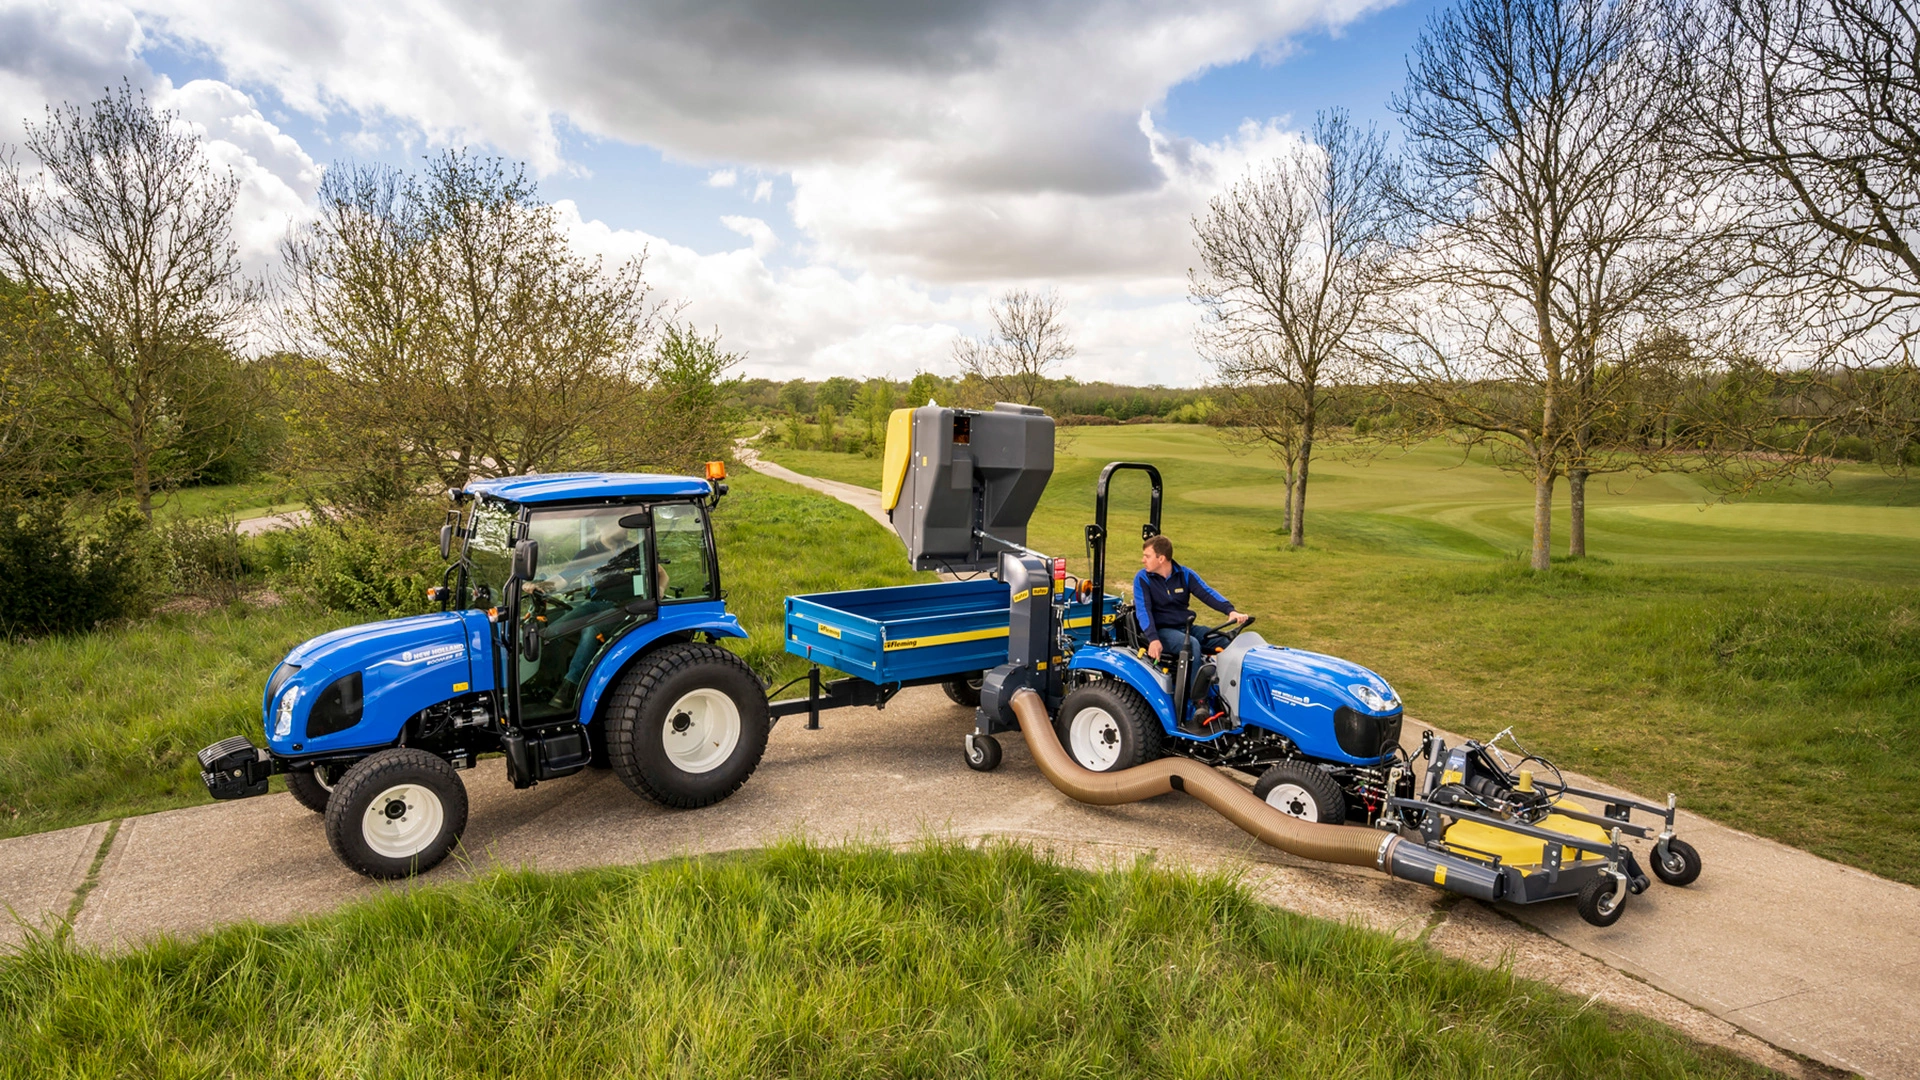 New Holland Boomer farm tractors performing duties on fields